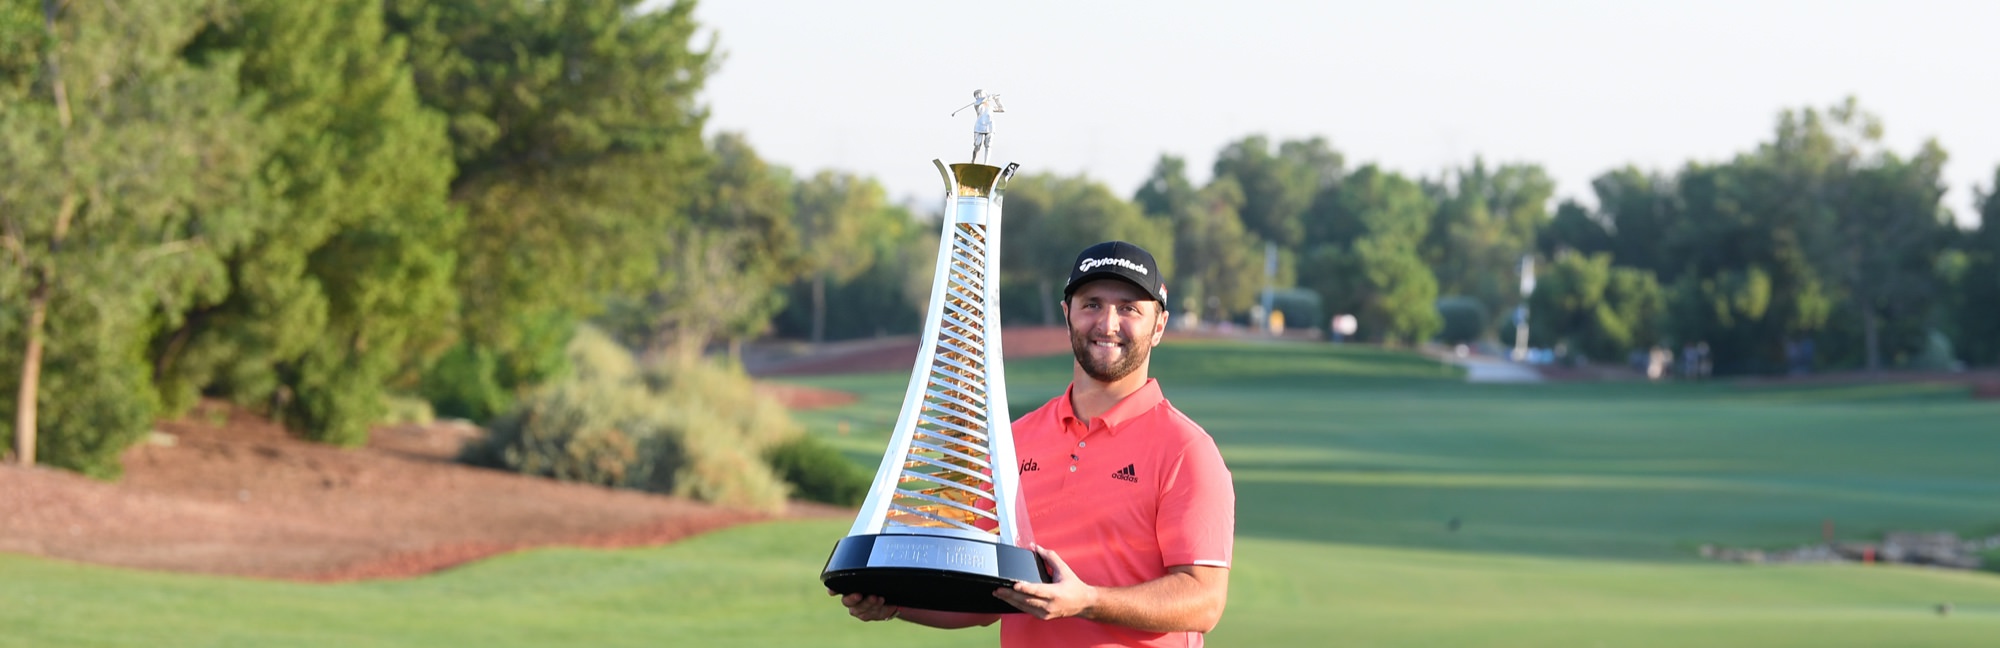 Rahm follows in Seve's footsteps with Race to Dubai win